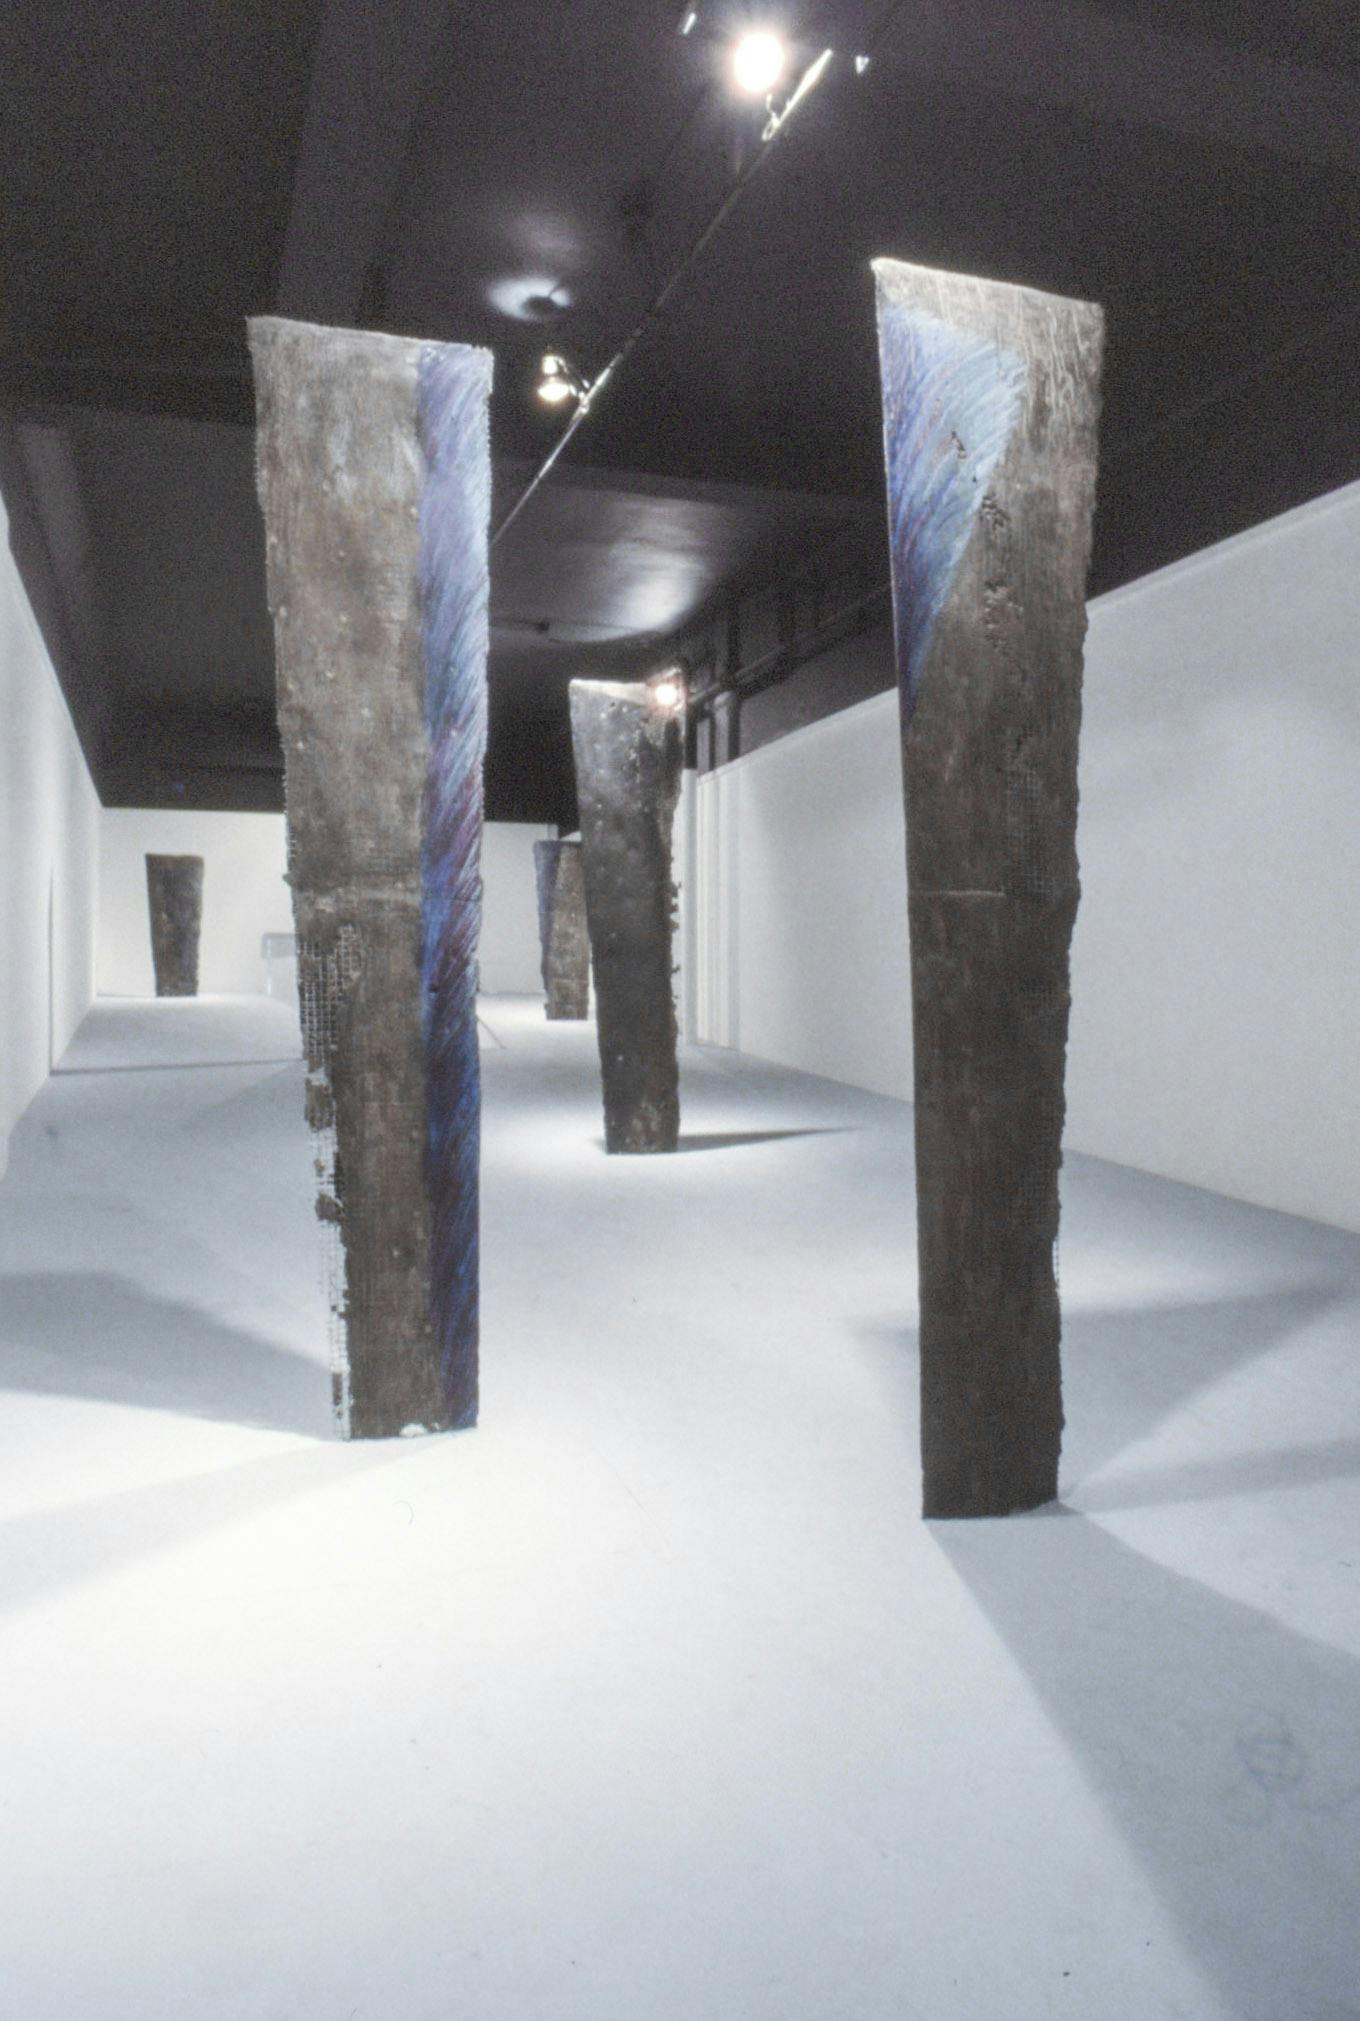 Several flat planks of cement fondu on wire stand vertically in a gallery space. They are glossy and well-lit, and have streaks of blue and purple along their flat edge.